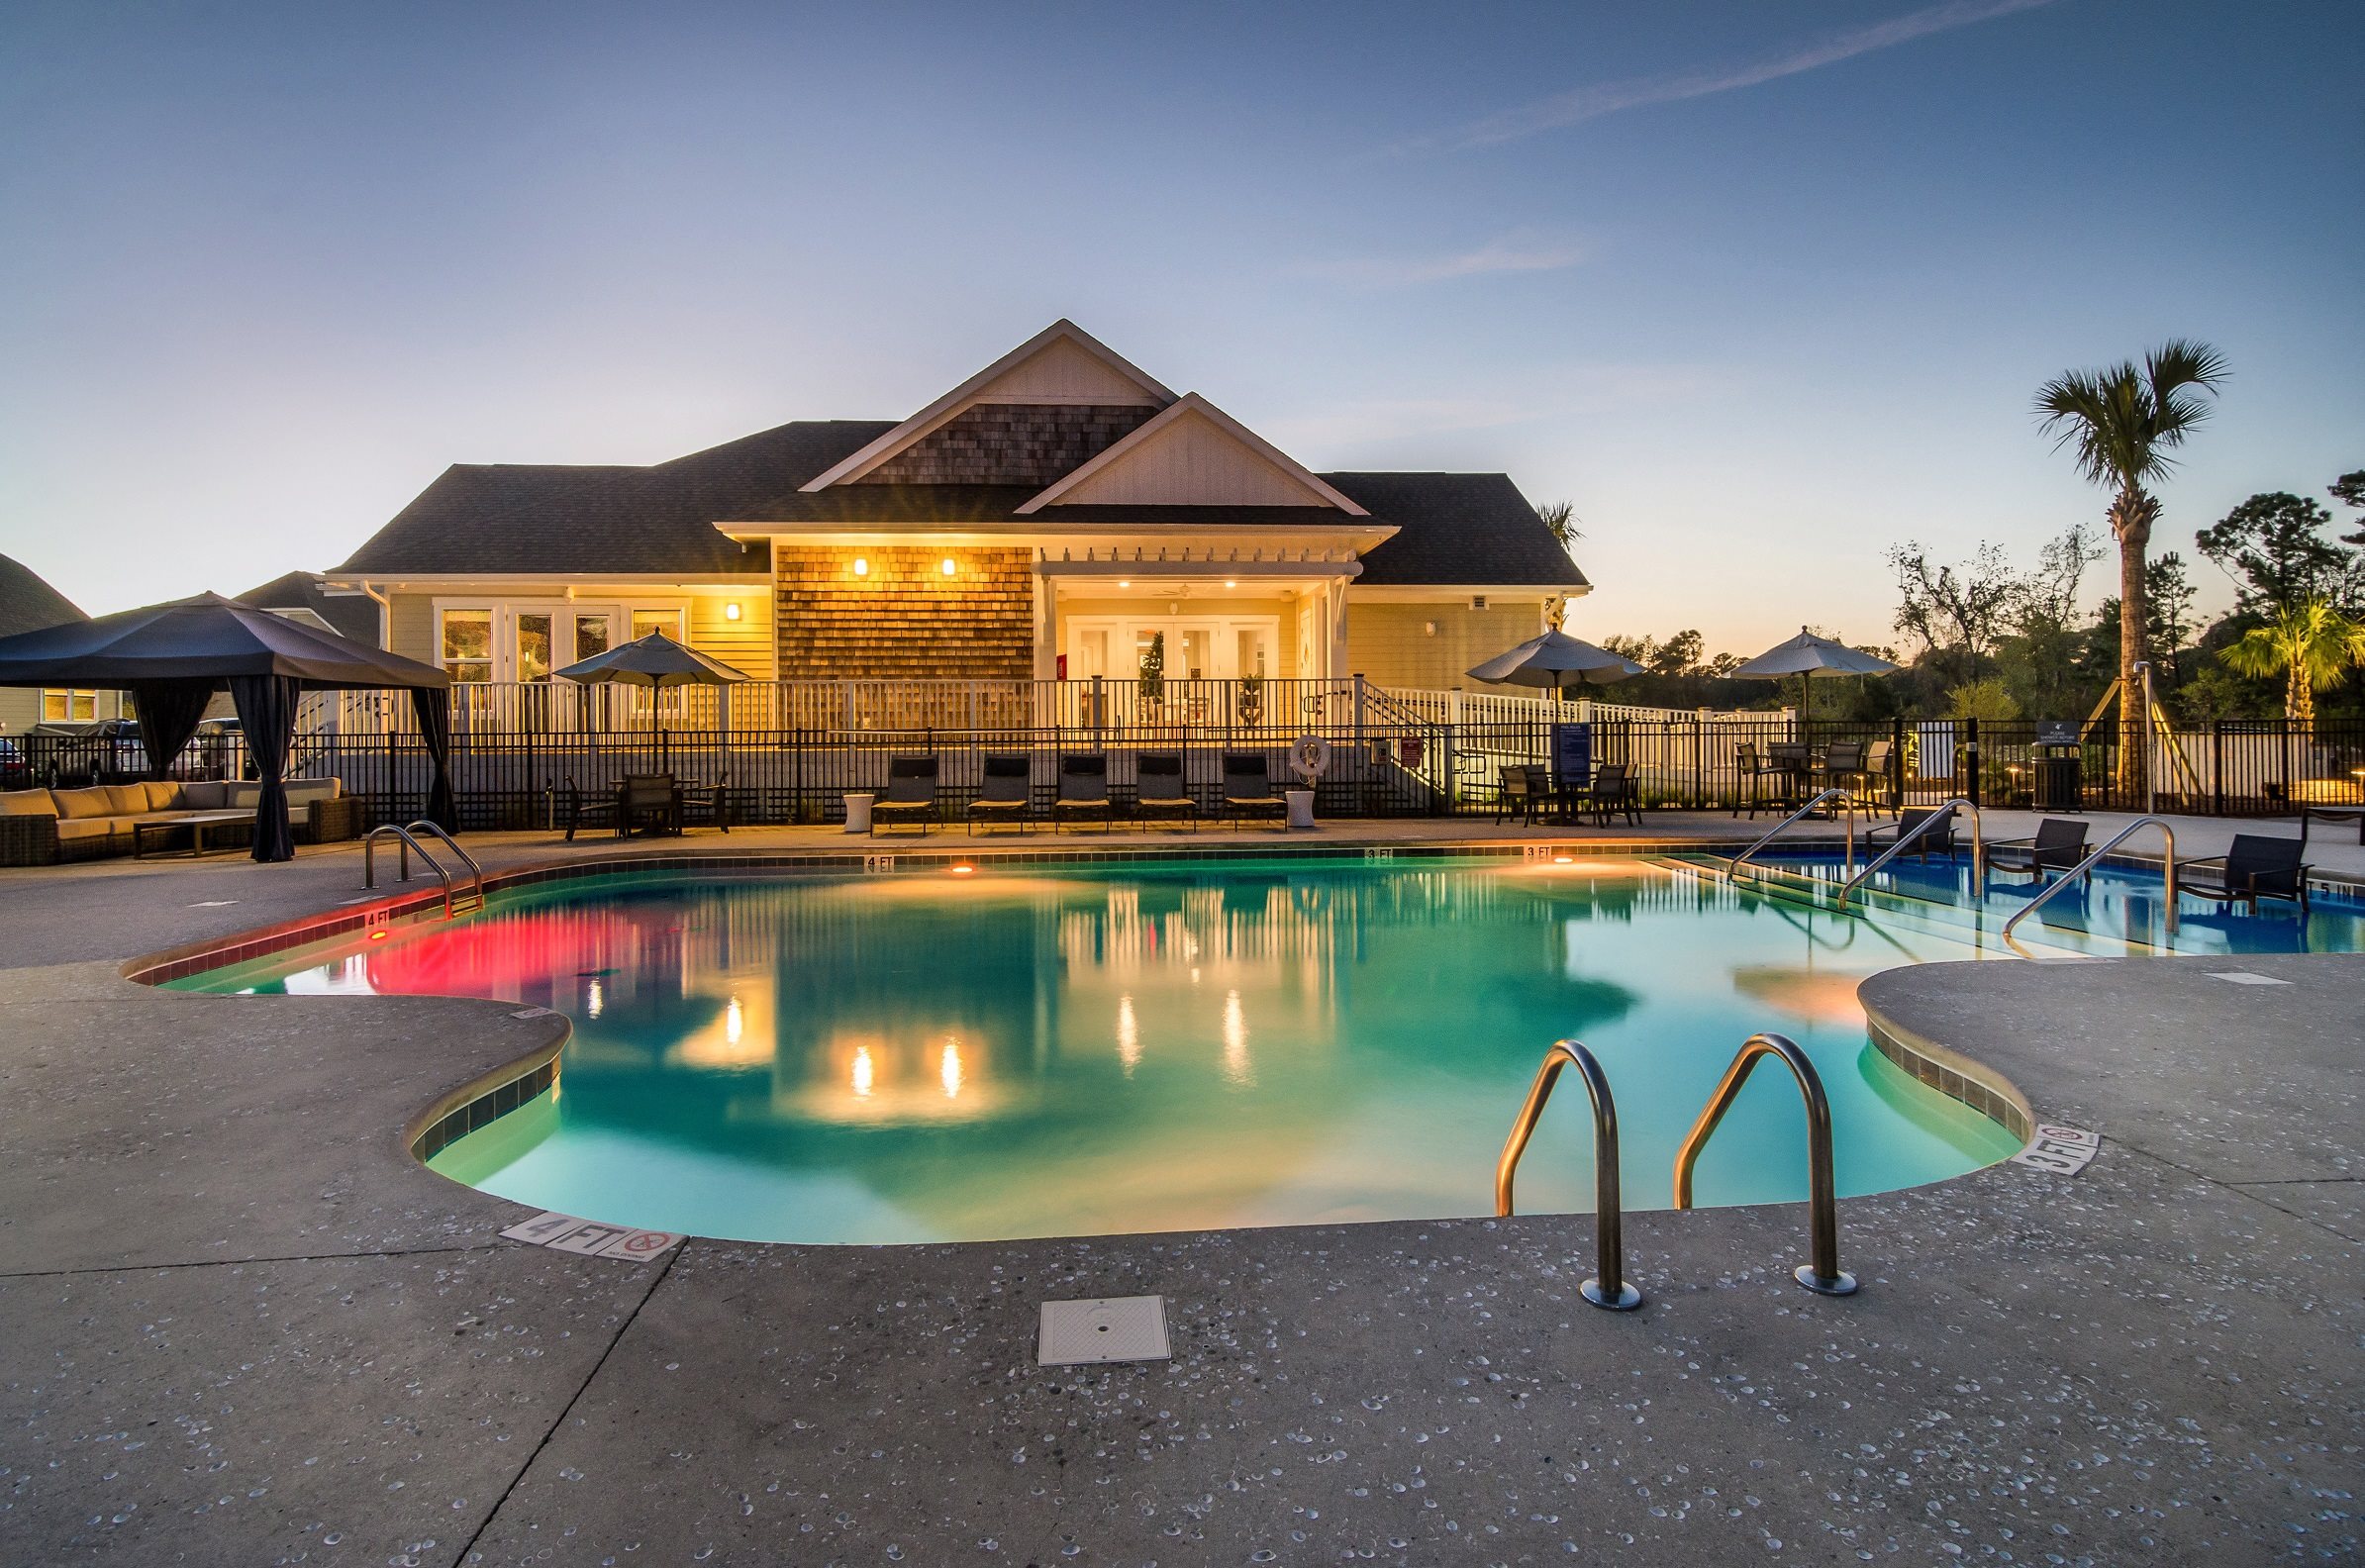 Apartments for Rent in Wilmington NC - Myrtle Landing - Sparkling Pool Surrounded by Lounge Seating and Private Cabanas